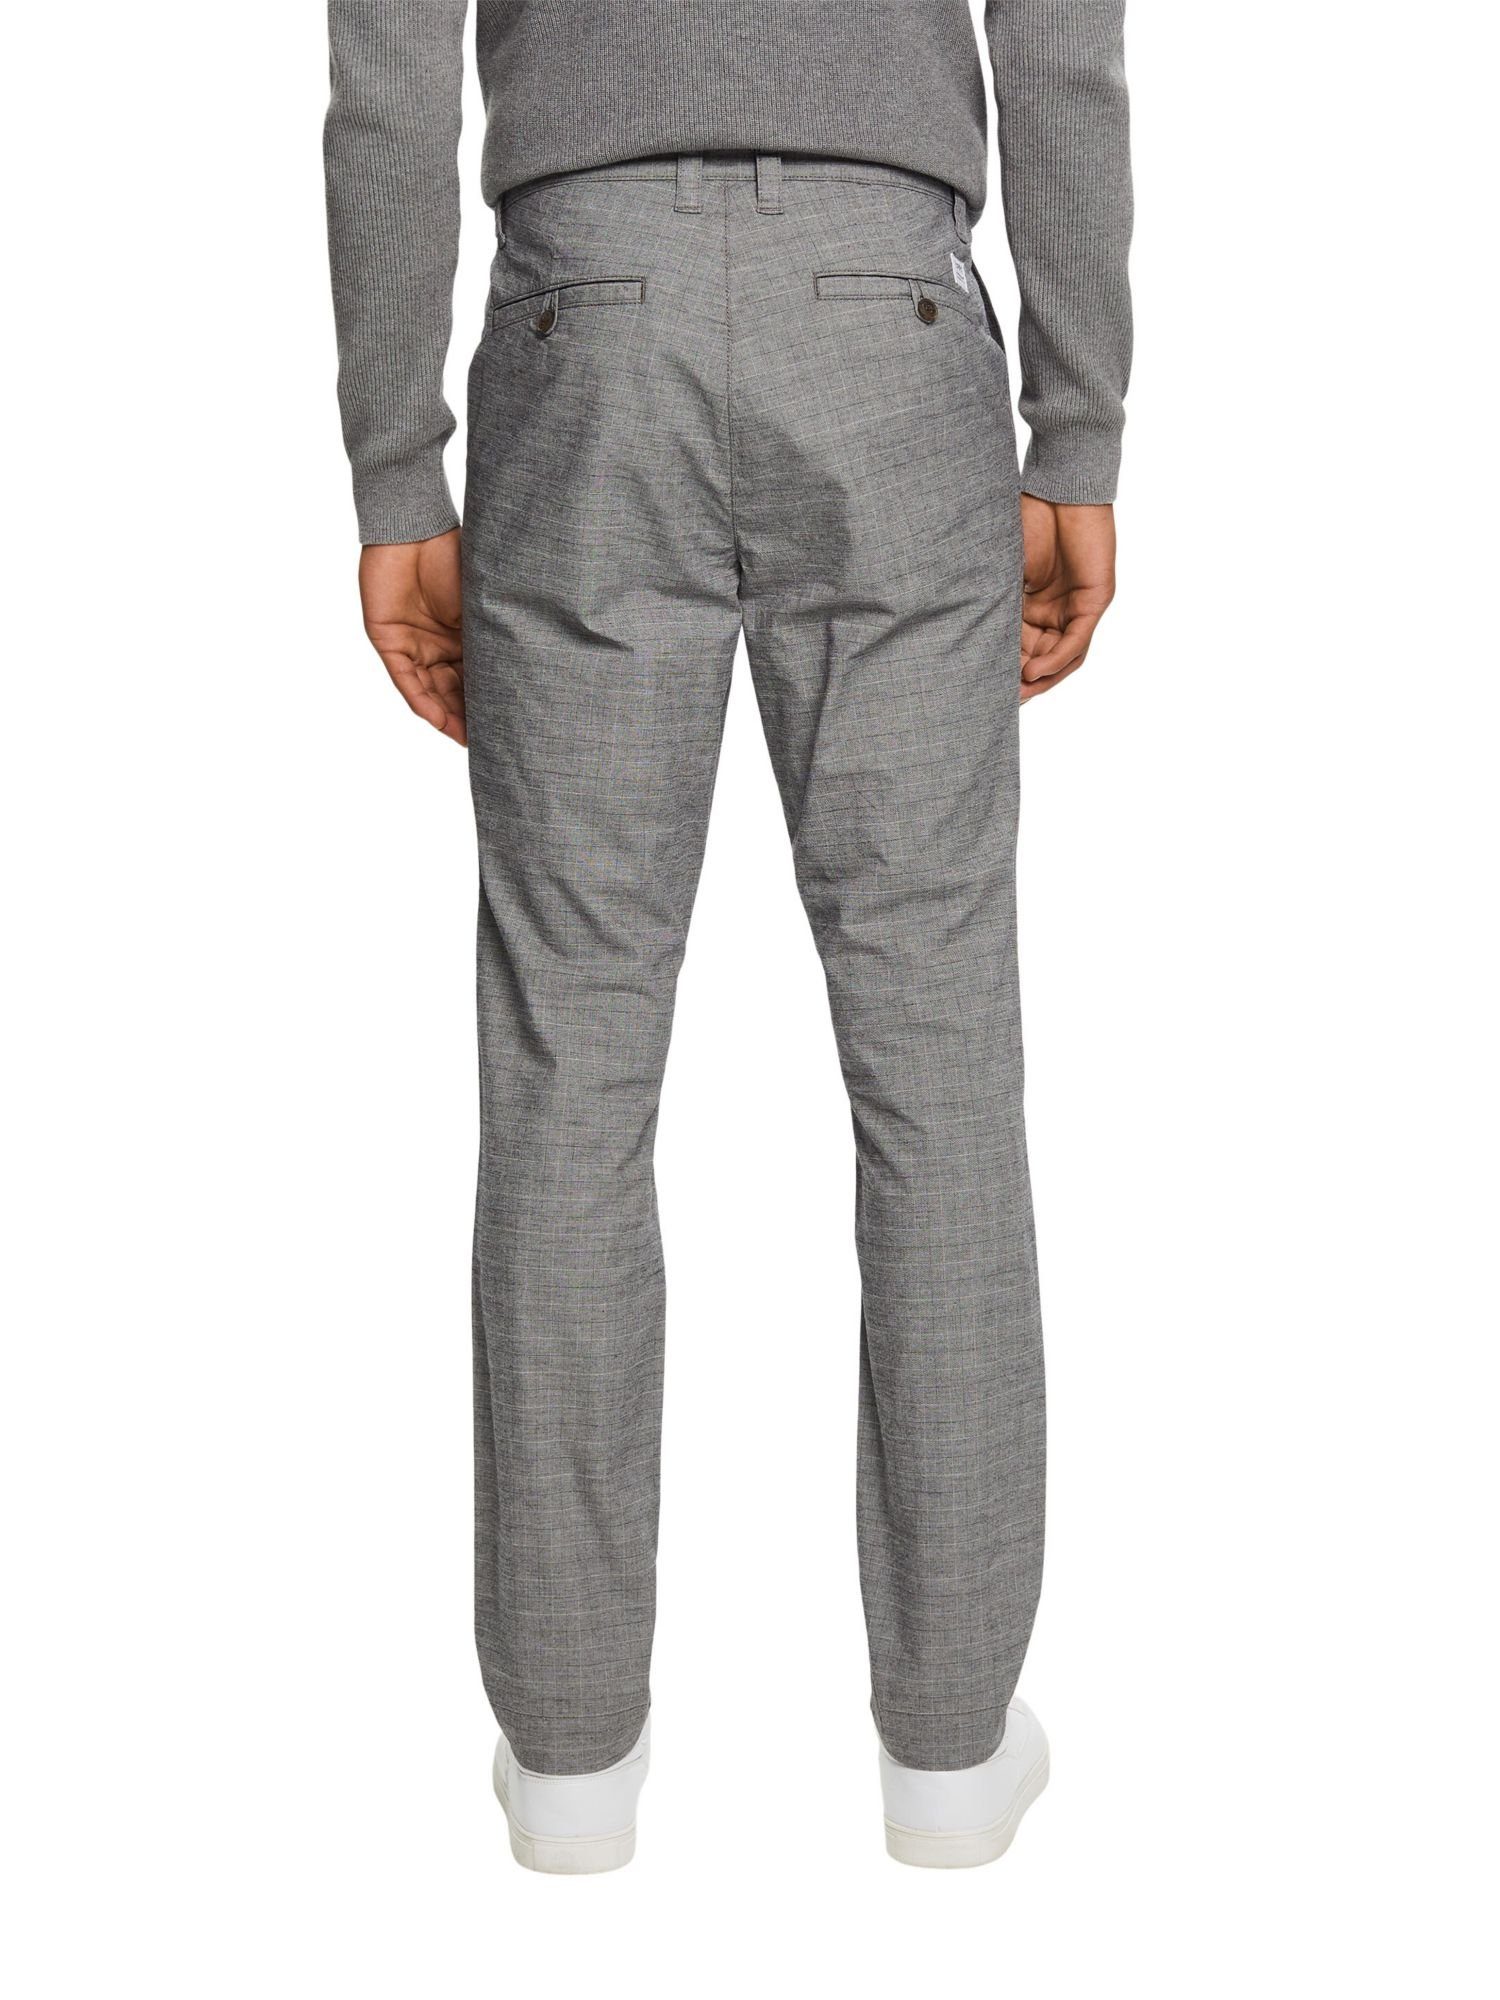 Esprit Pants ANTHRACITE Stoffhose woven